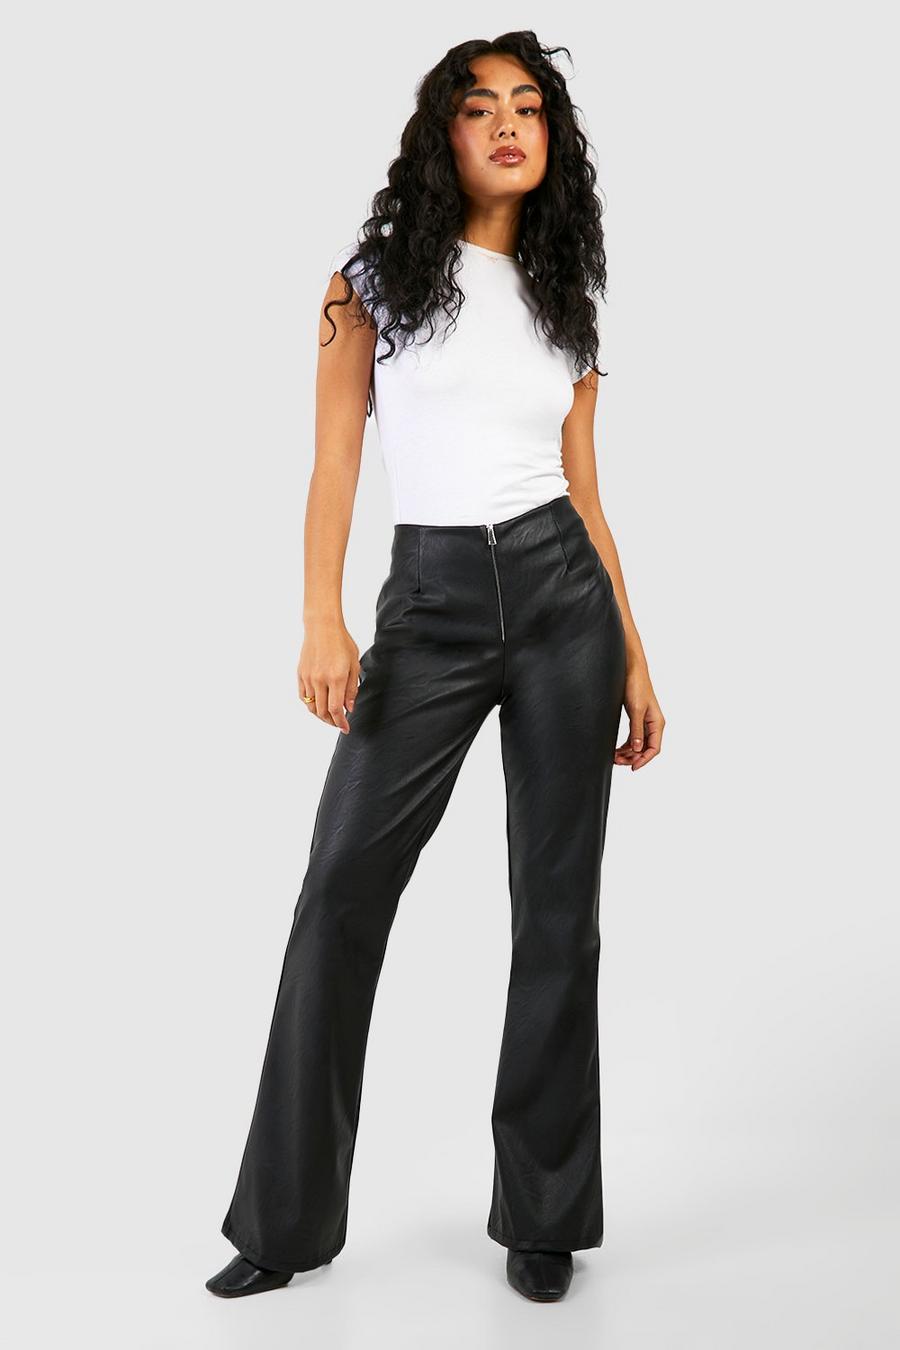 Black Faux Leather Zip Front Flare Pants image number 1